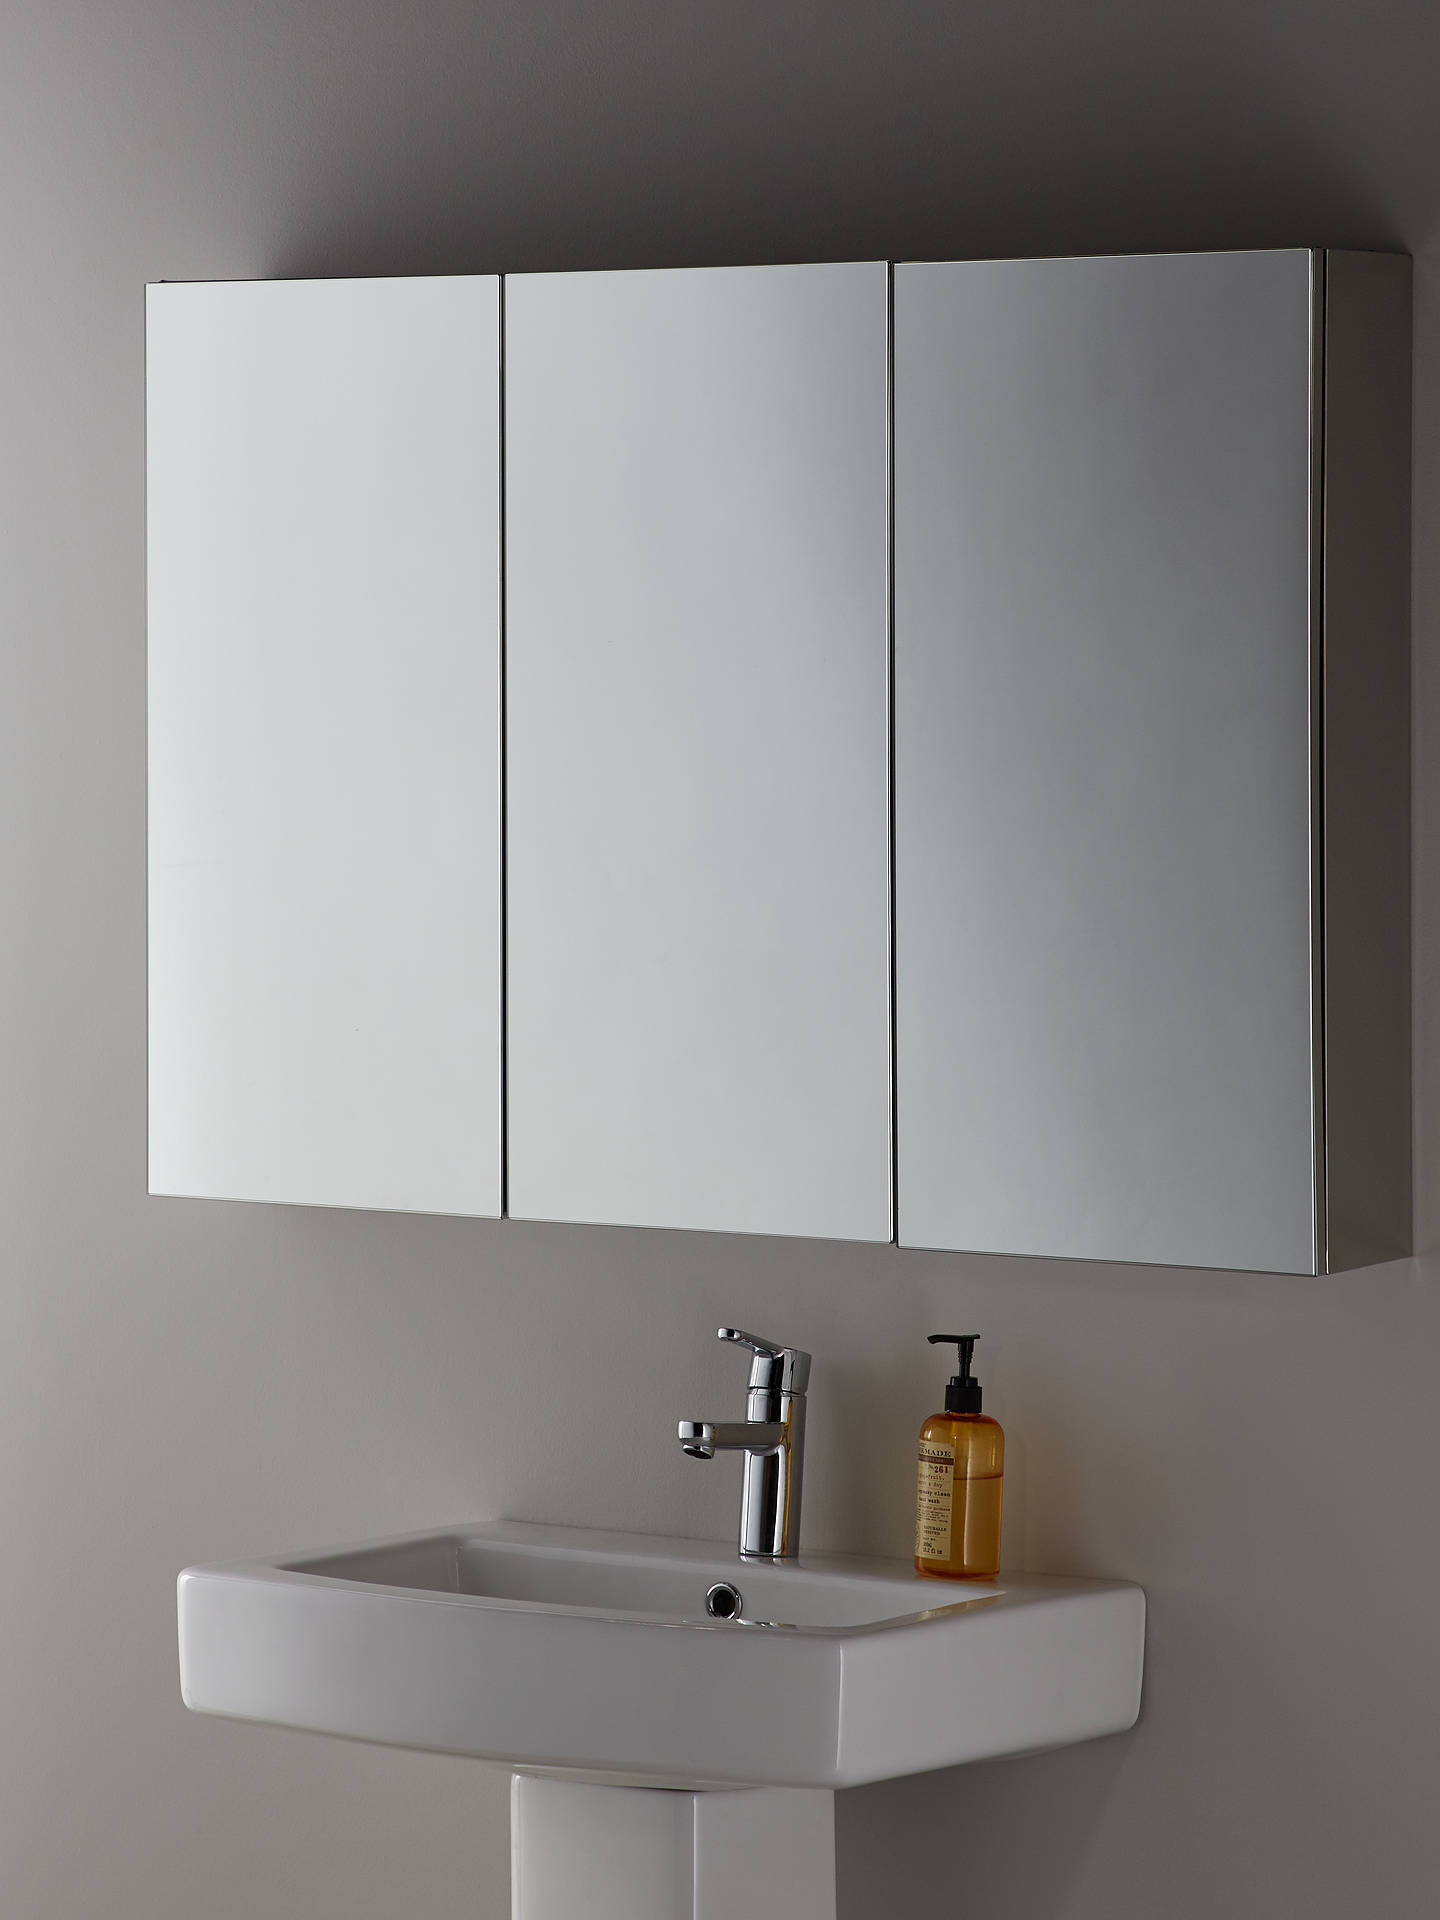 Mirrored Bathroom Cabinets Awesome John Lewis &amp; Partners Triple Mirrored Bathroom Cabinet